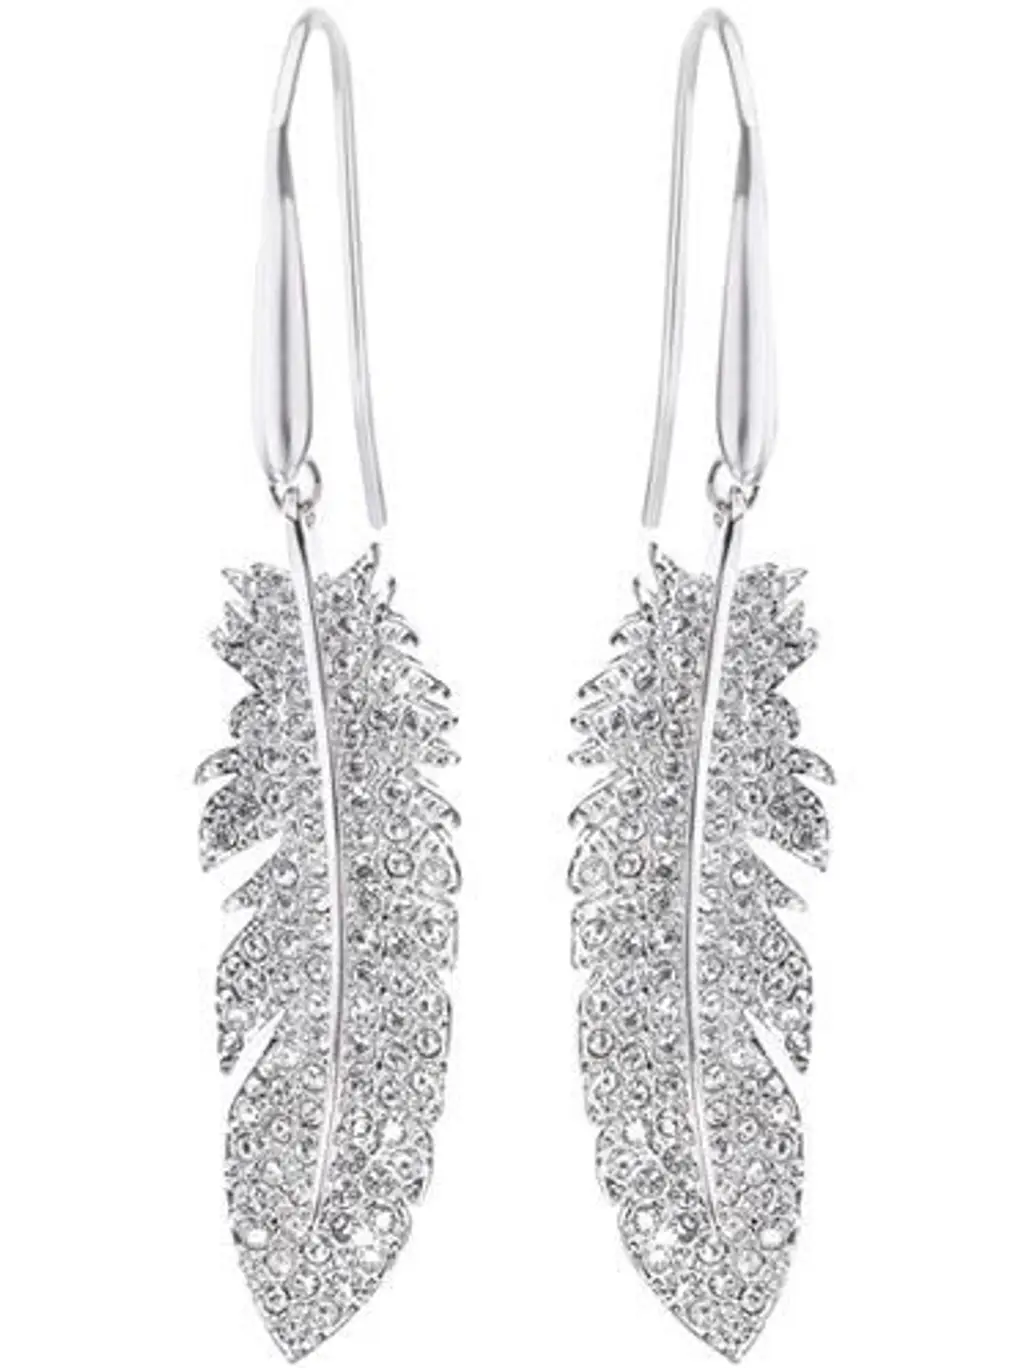 Sparkle with Blinged out Feather Earrings